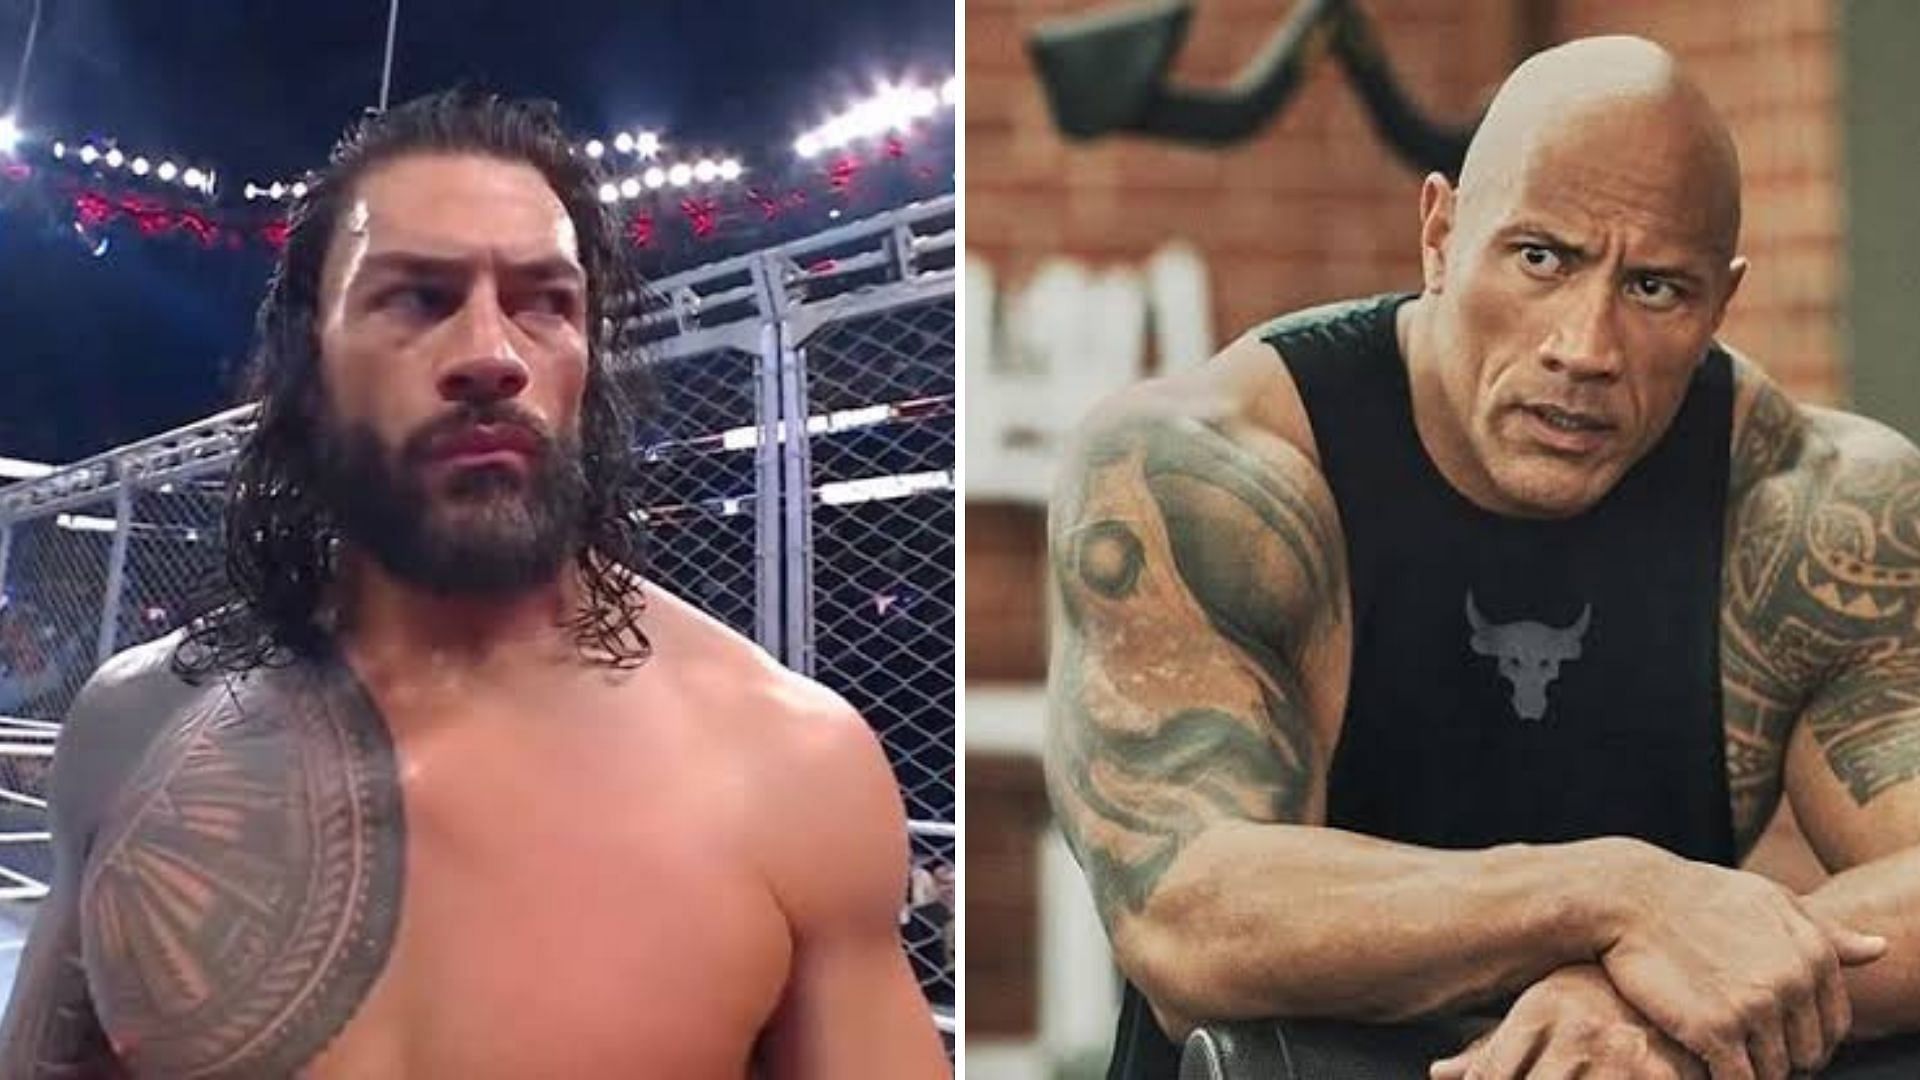 Roman Reigns and The Rock are two of WWE